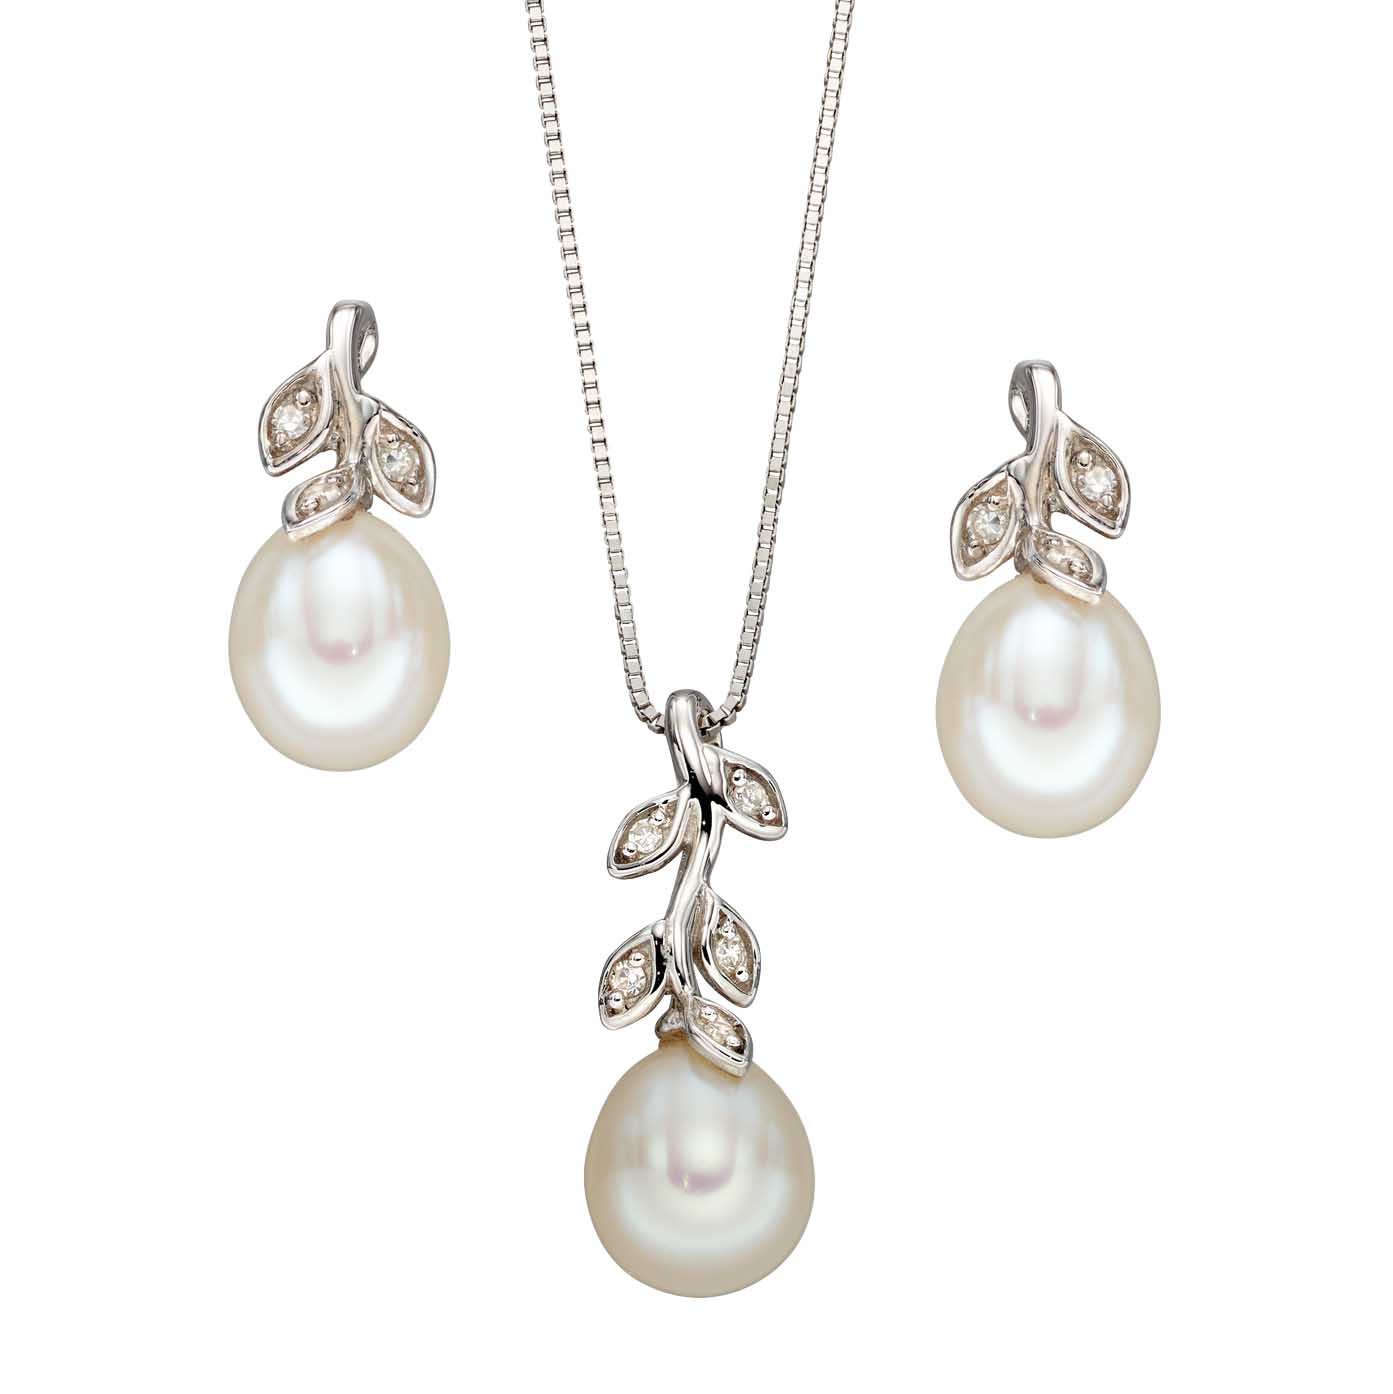 9ct white gold pearl and diamond leaf pendant on chain and earrings on Sally Thorntons jewellery blog from AA Thornton Kettering Northampton 